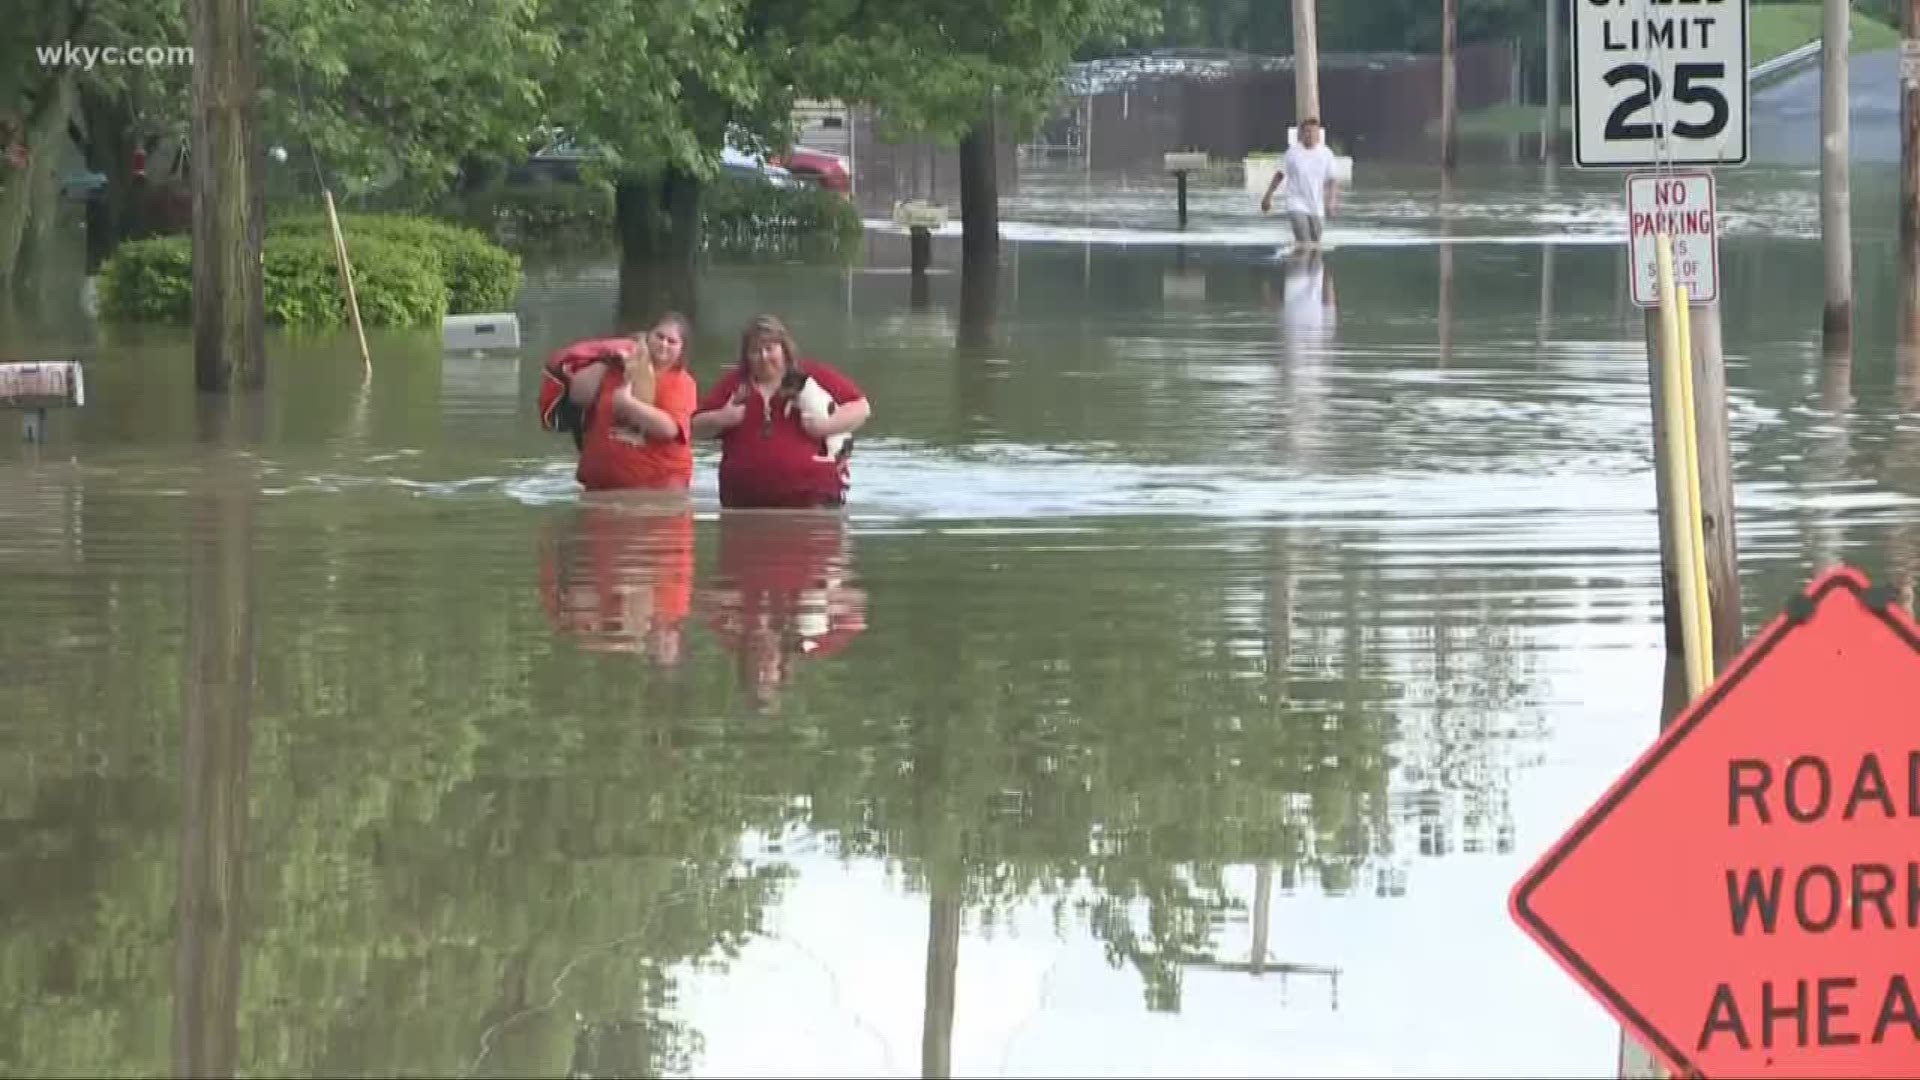 From Rittman, to Massillon, to Norton, communities are trying to figure out what's next after heavy rains caused massive flooding.